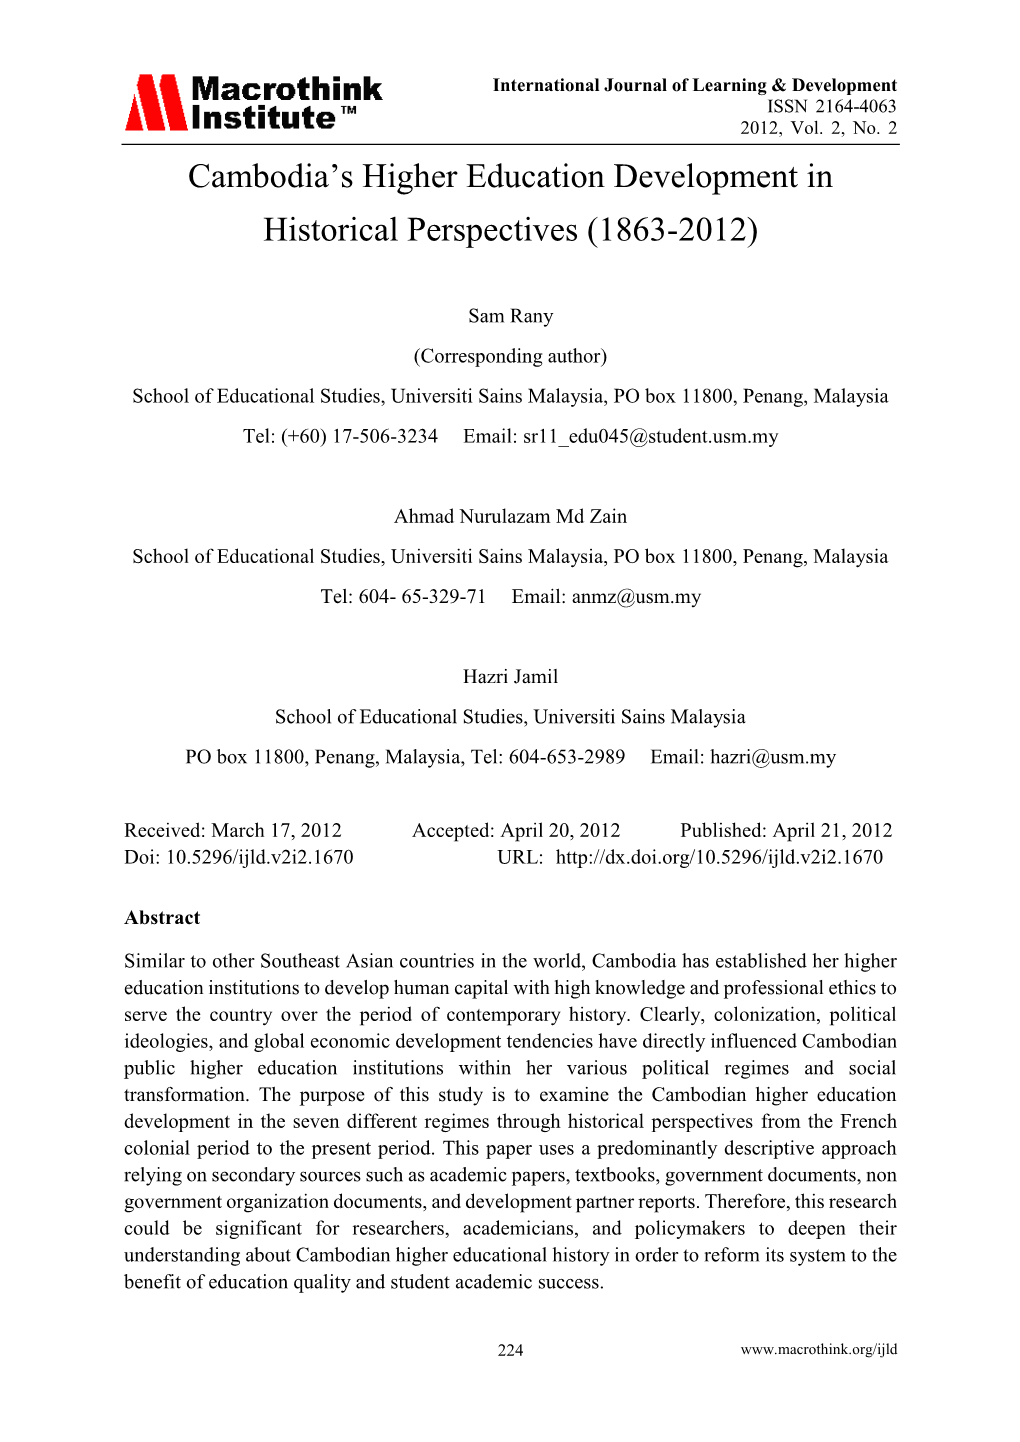 Cambodia's Higher Education Development in Historical Perspectives